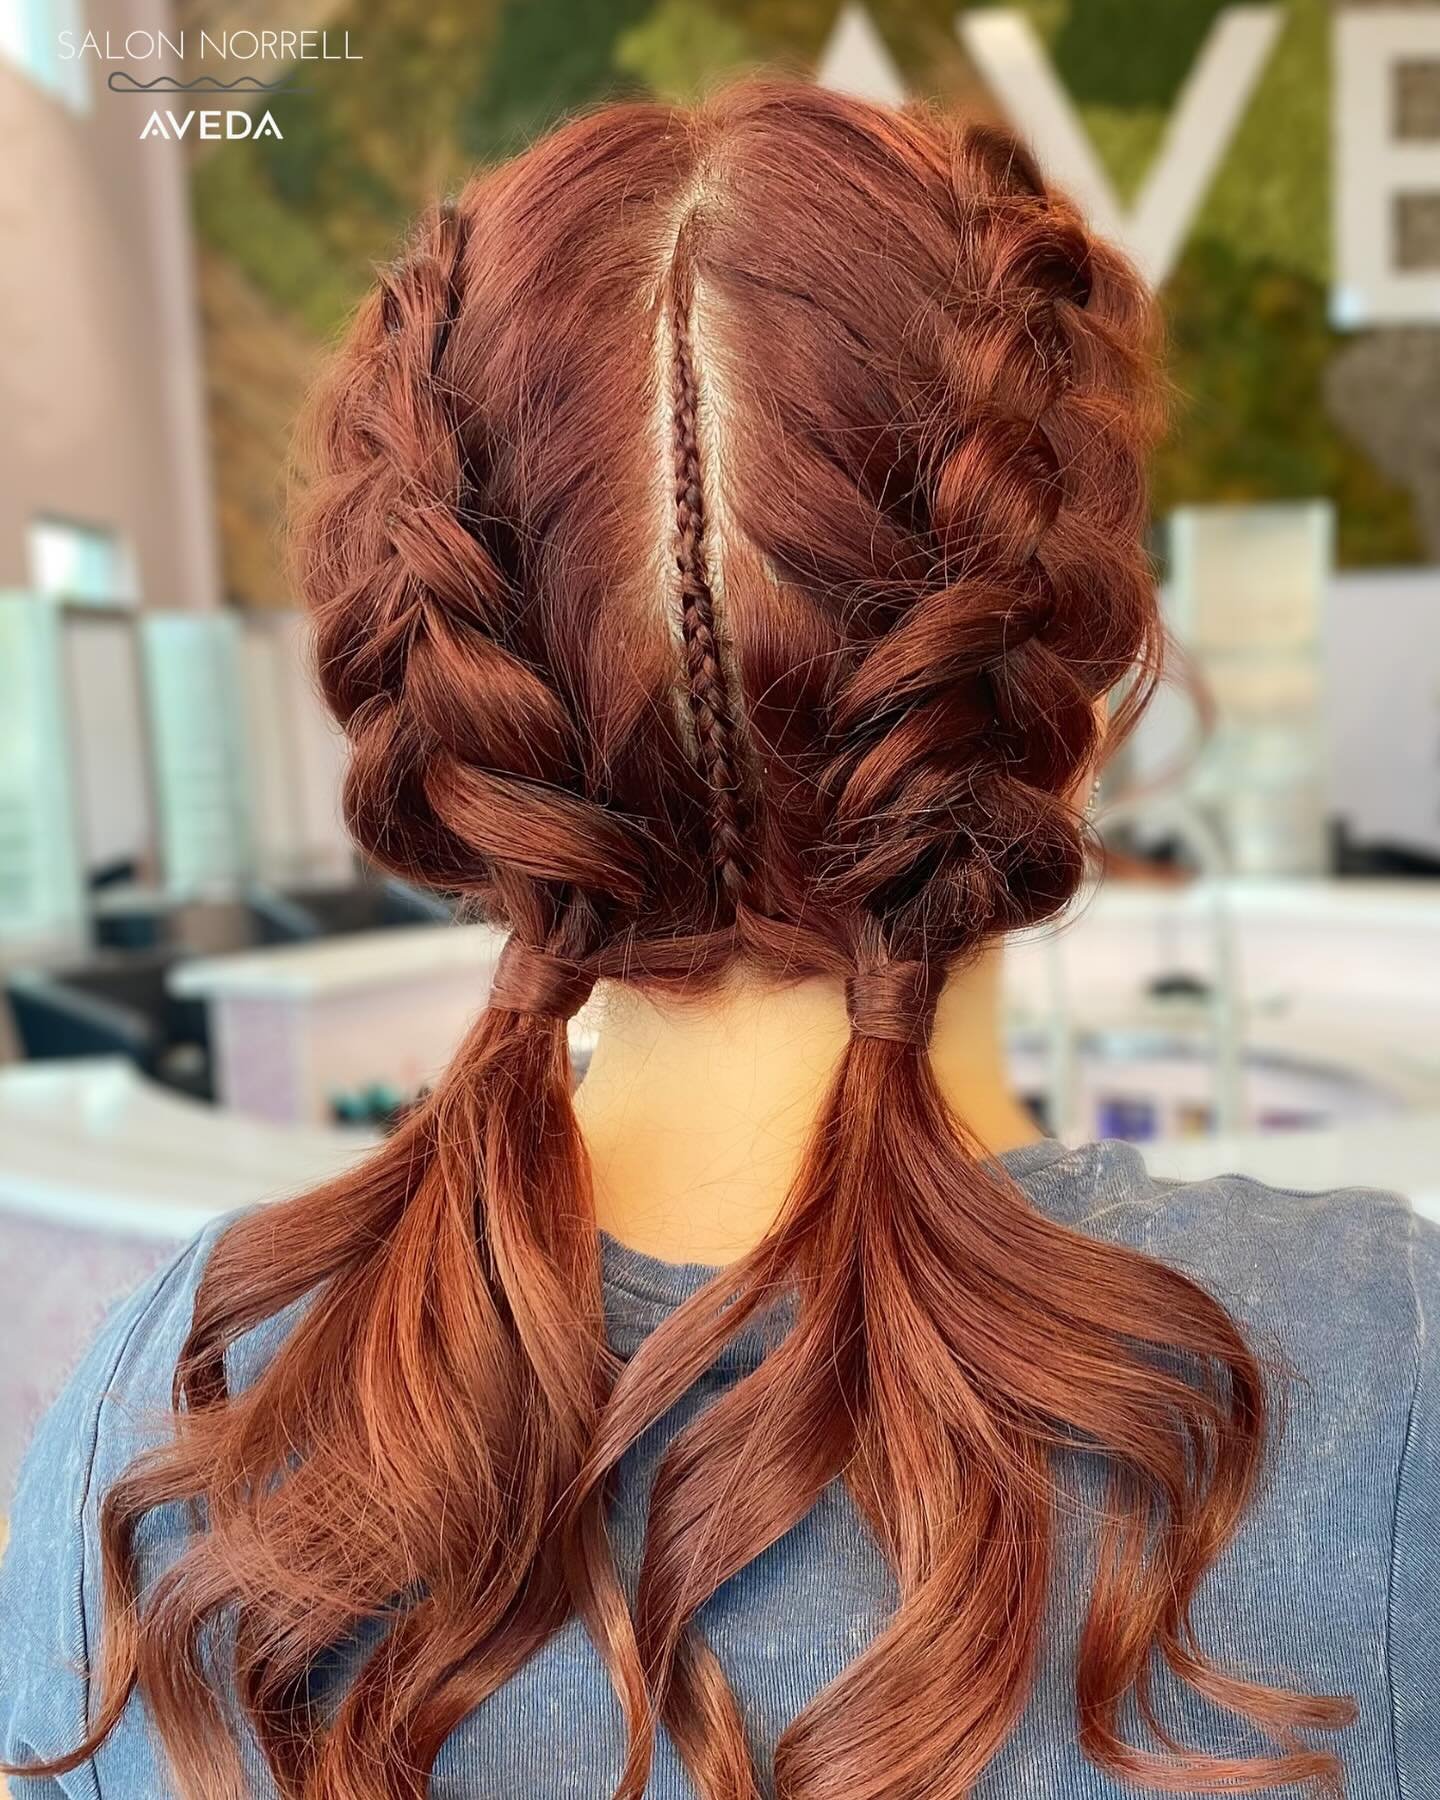 Style | jessica 
Make your reservation today! 
🗓Reservations are best 
📲Text 813-590-6765 
☎️Call 813-265-2000 
🔗 Link in bio to book online 
💻TampaAveda.com 
📍Tampa, Florida 
🏷 tag us #salonnorrell